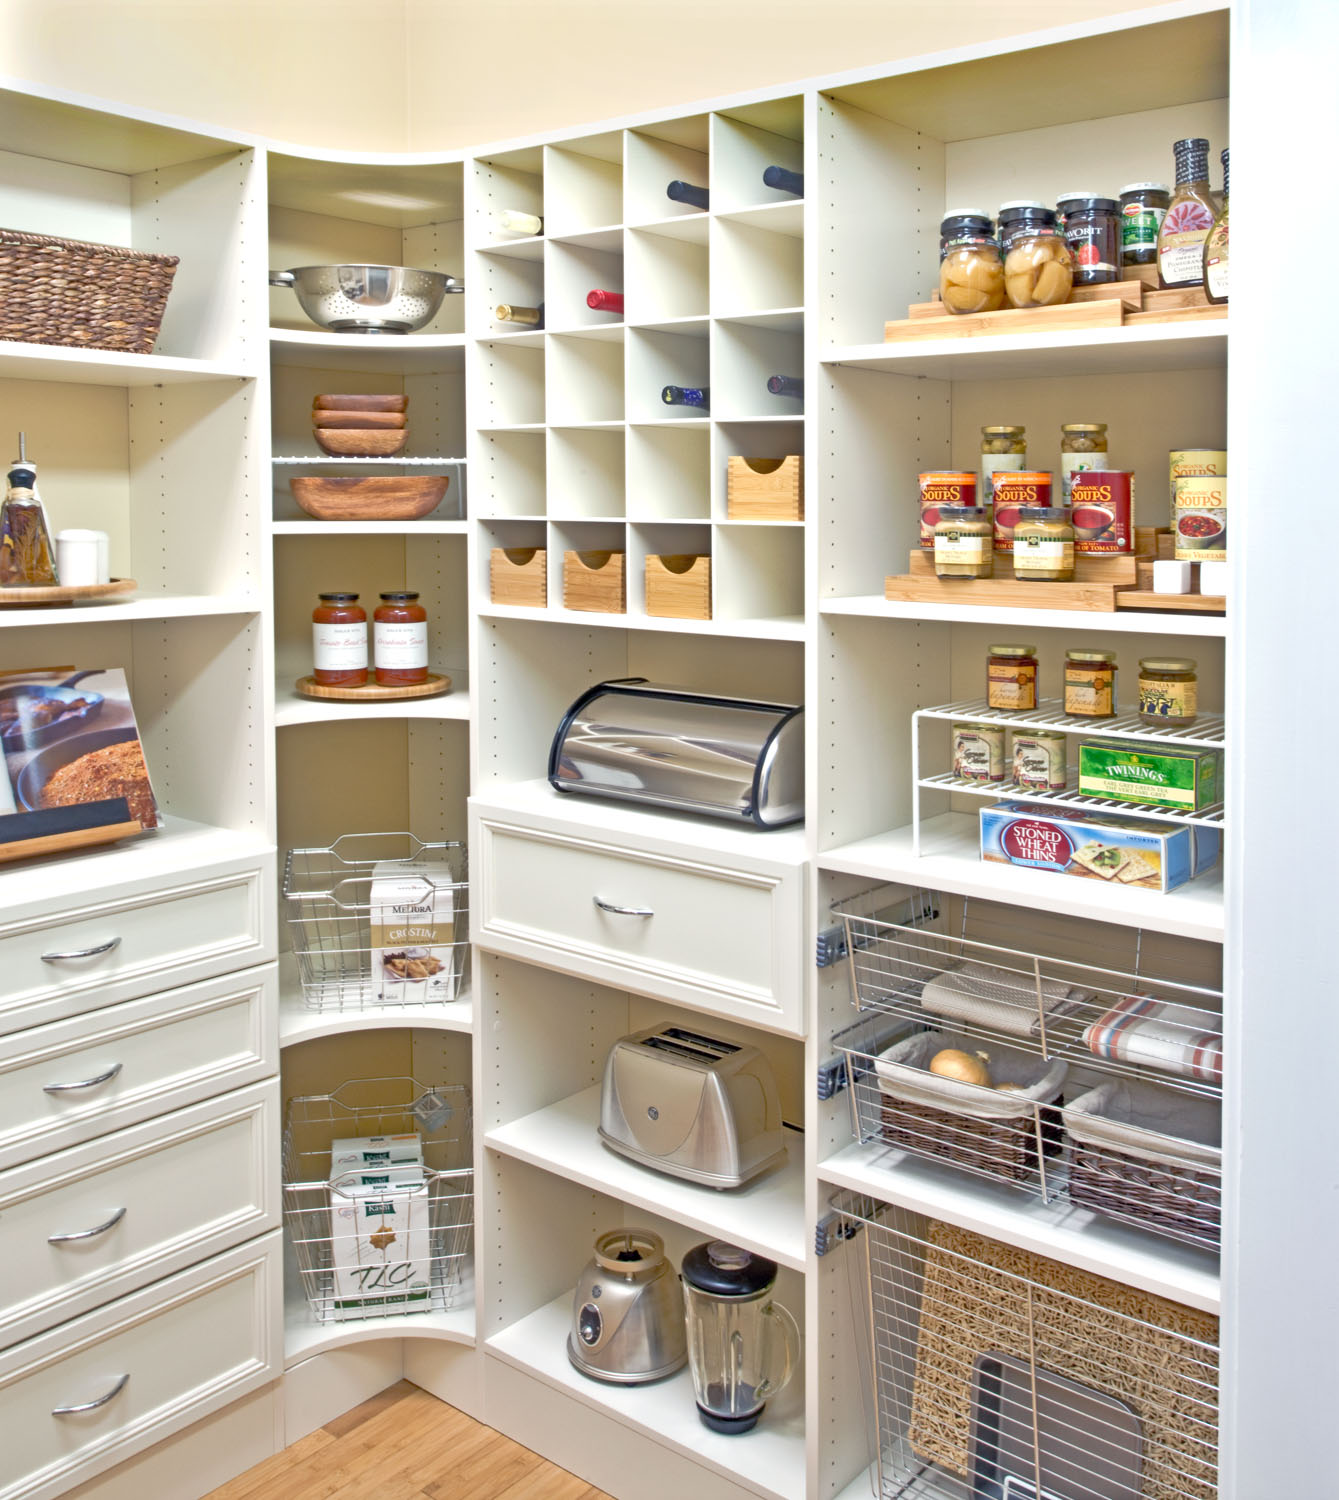 Tips for Organizing the Kitchen